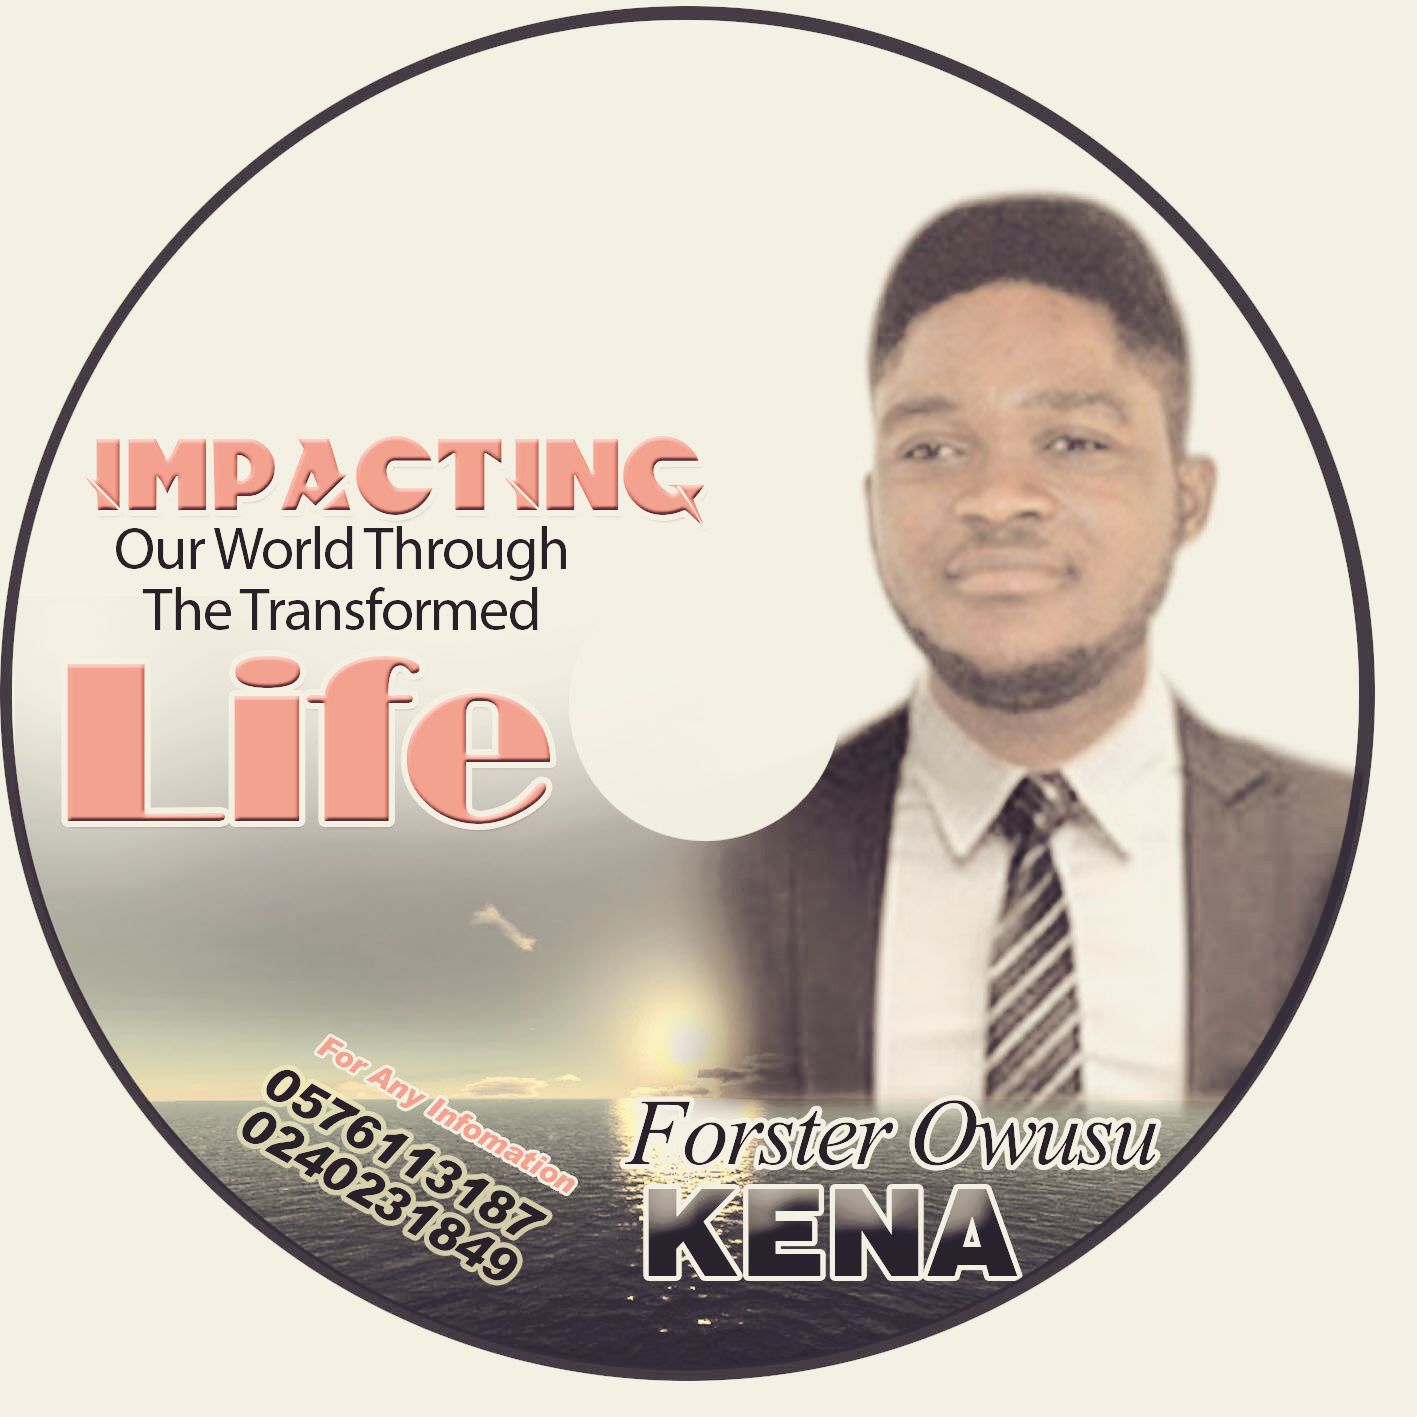 GET FAMILIAR: Listen or Download “Impacting Our World Through The Transformed Life” by Forster Owusu Kena